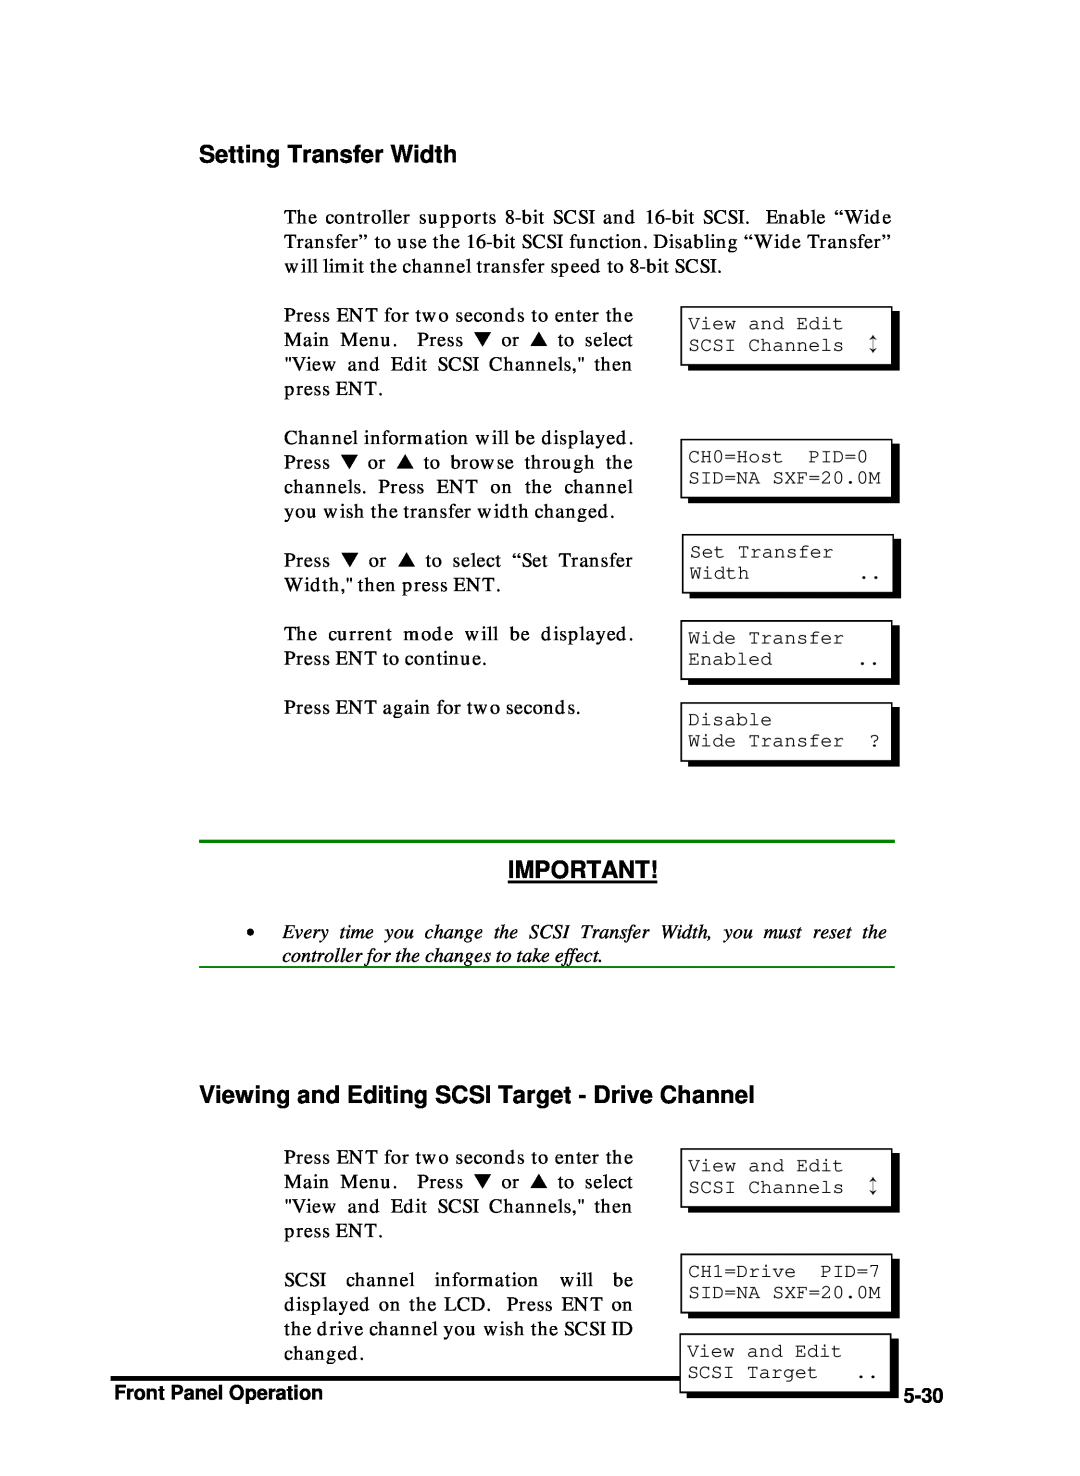 Compaq Infortrend manual Setting Transfer Width, Viewing and Editing SCSI Target - Drive Channel 